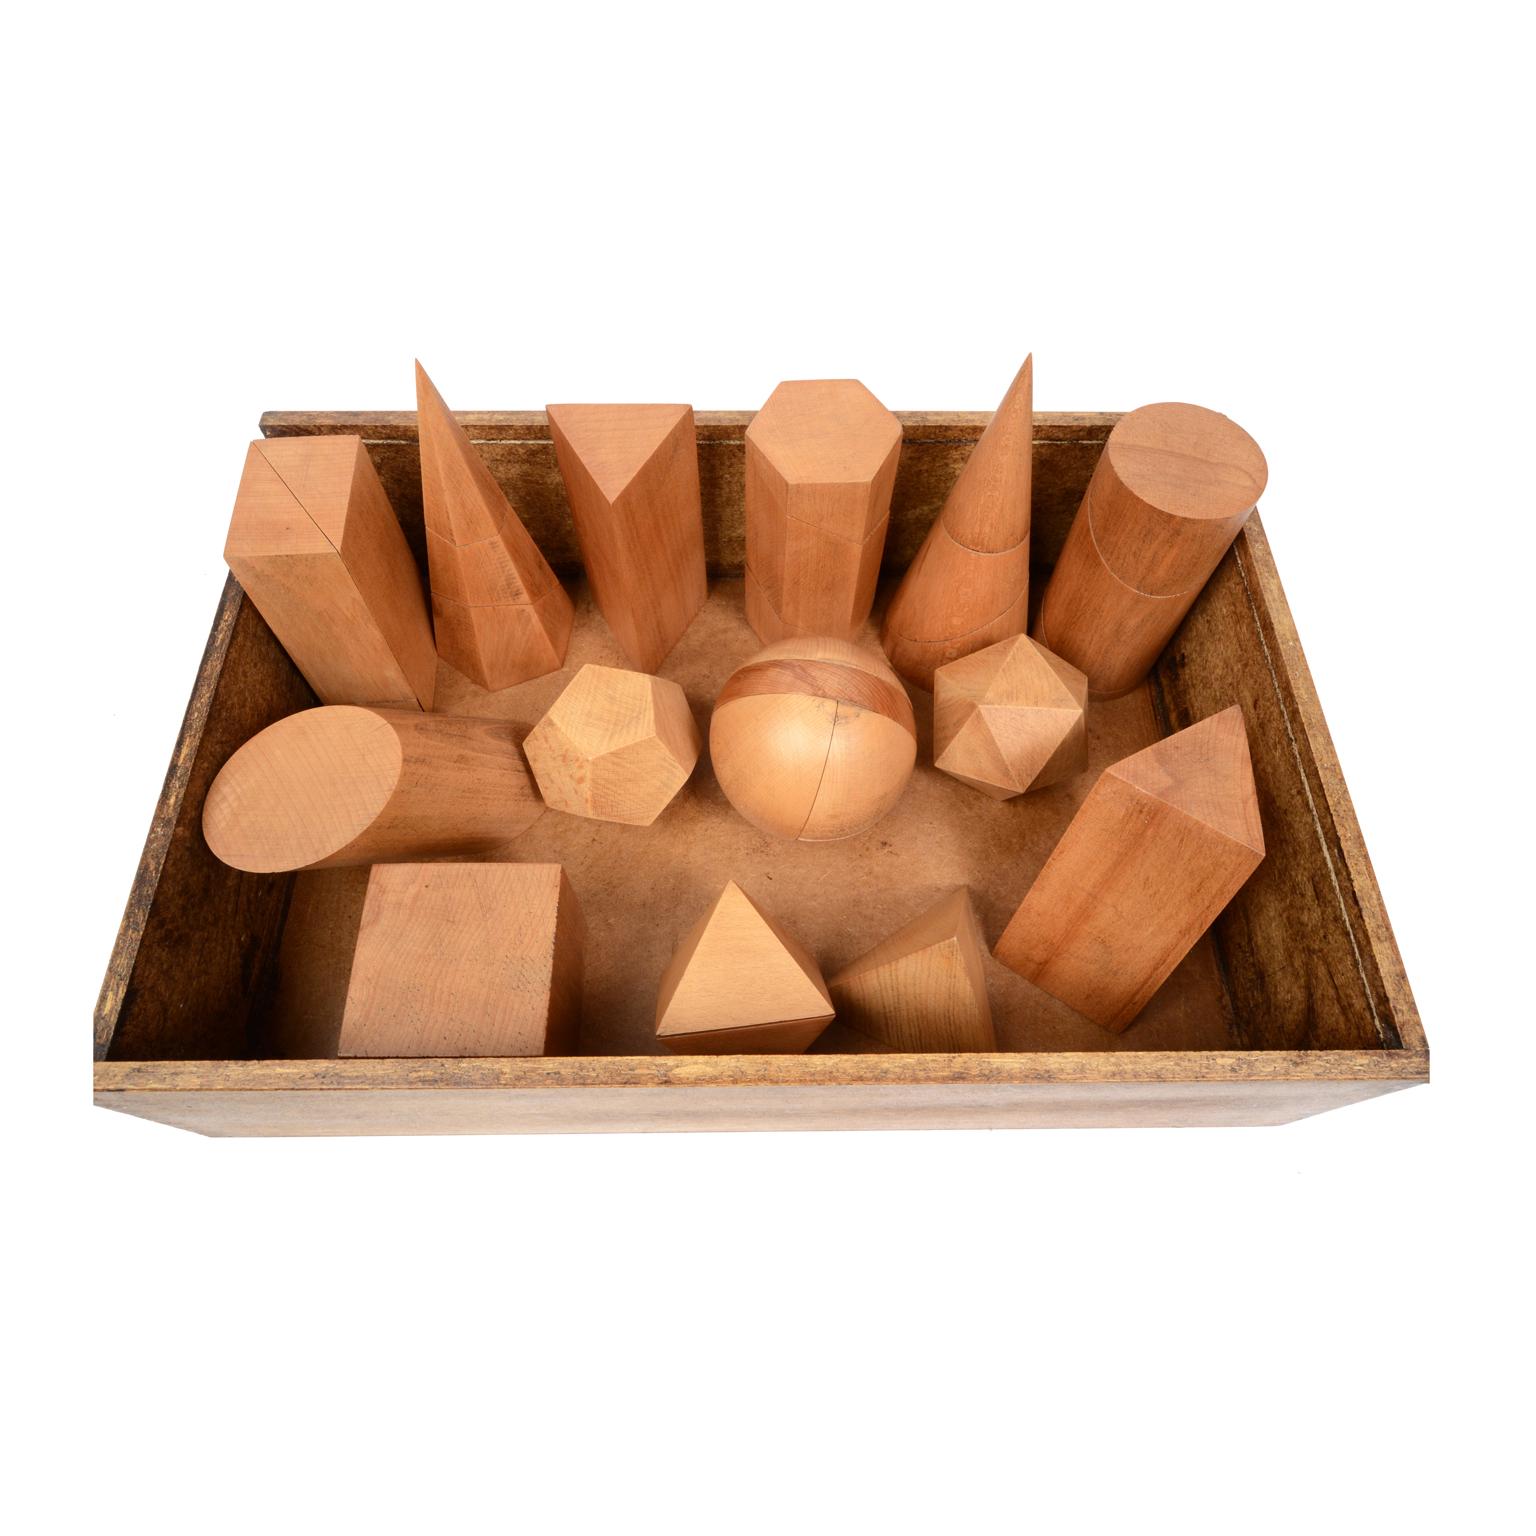 Box containing 14 dismounplate geometric solids of oak wood, height 20 cm, in their original wooden box complete with illustrative leaflet for calculating surfaces and volumes. Made for educational purposes for schools by Antonio Vallardi publisher